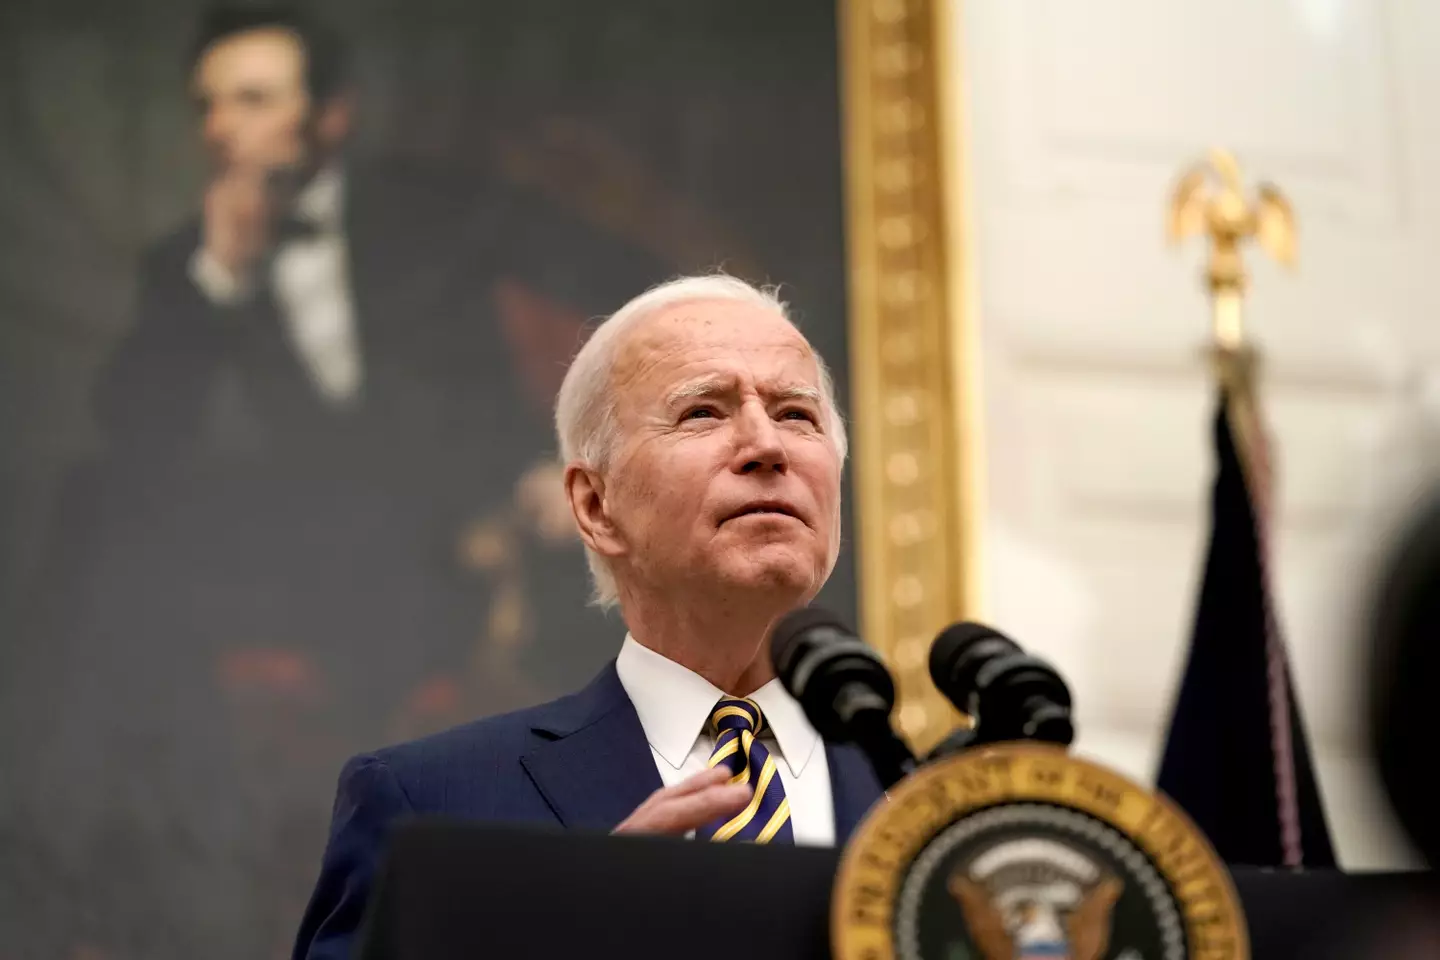 President Biden approved plans to shoot down the device.